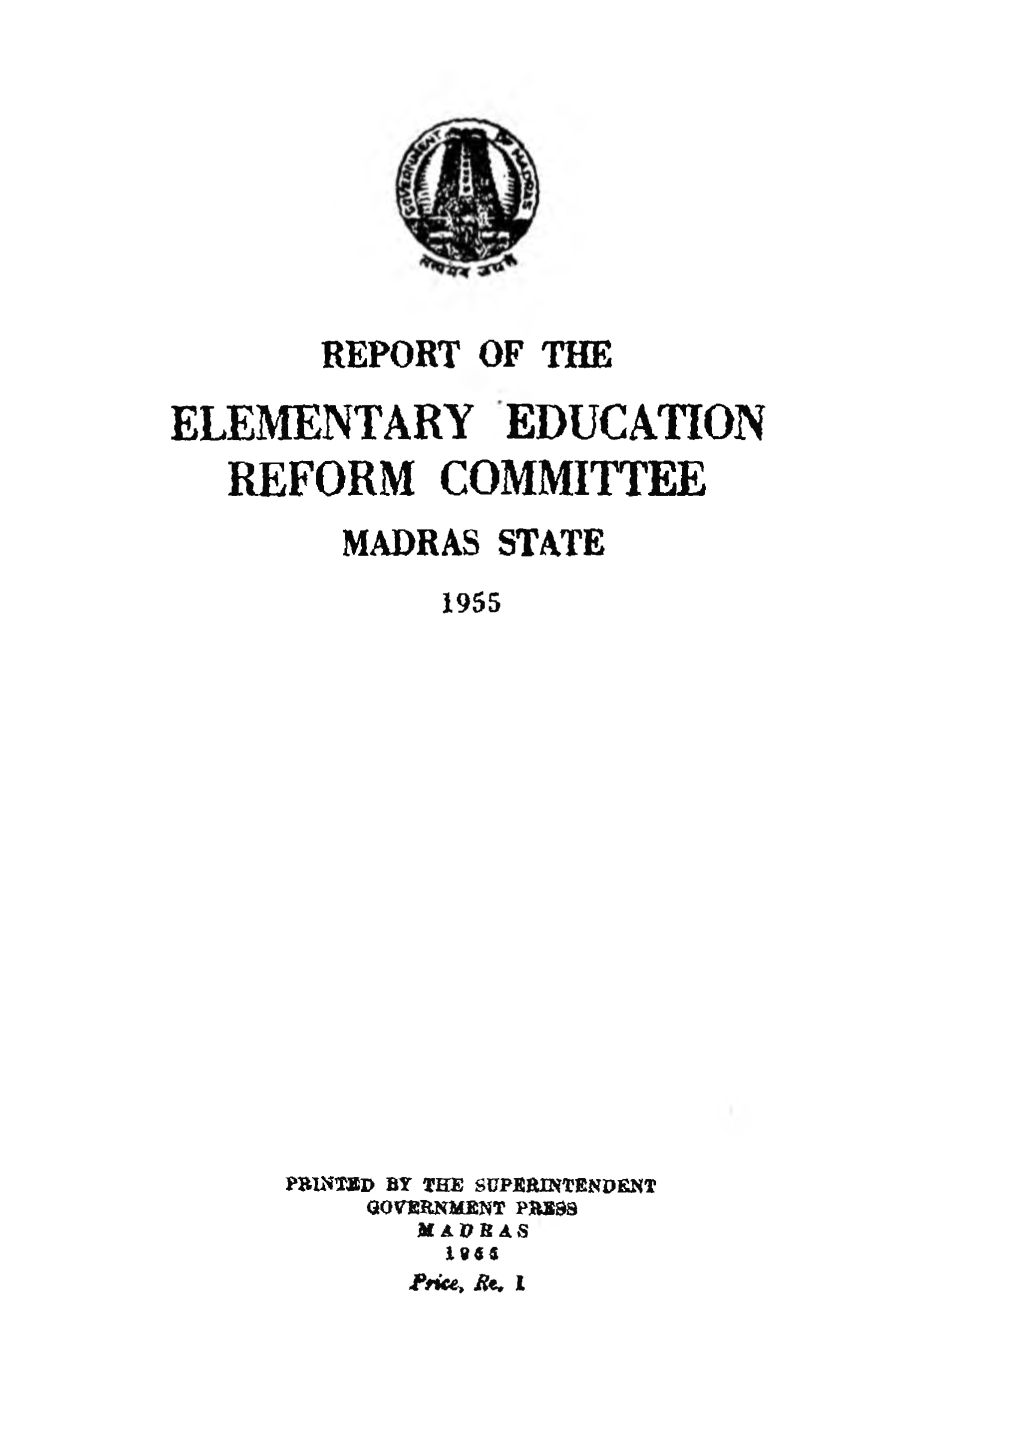 Elementary Education Reform Committee Madras State